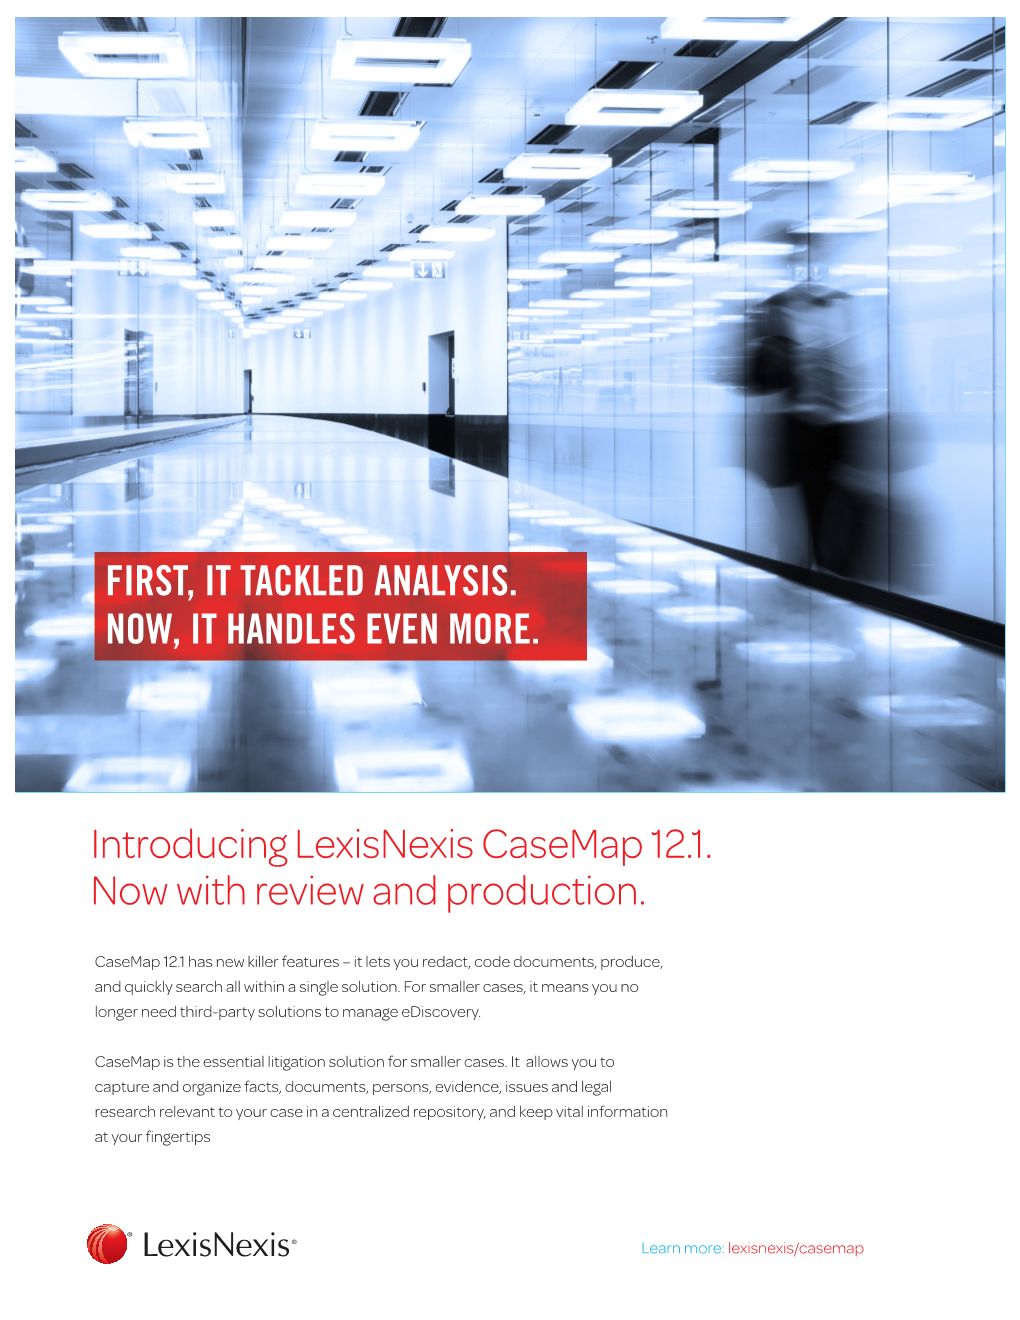 Introducing Lexisnexis Casemap 12.1. Now with Review and Production